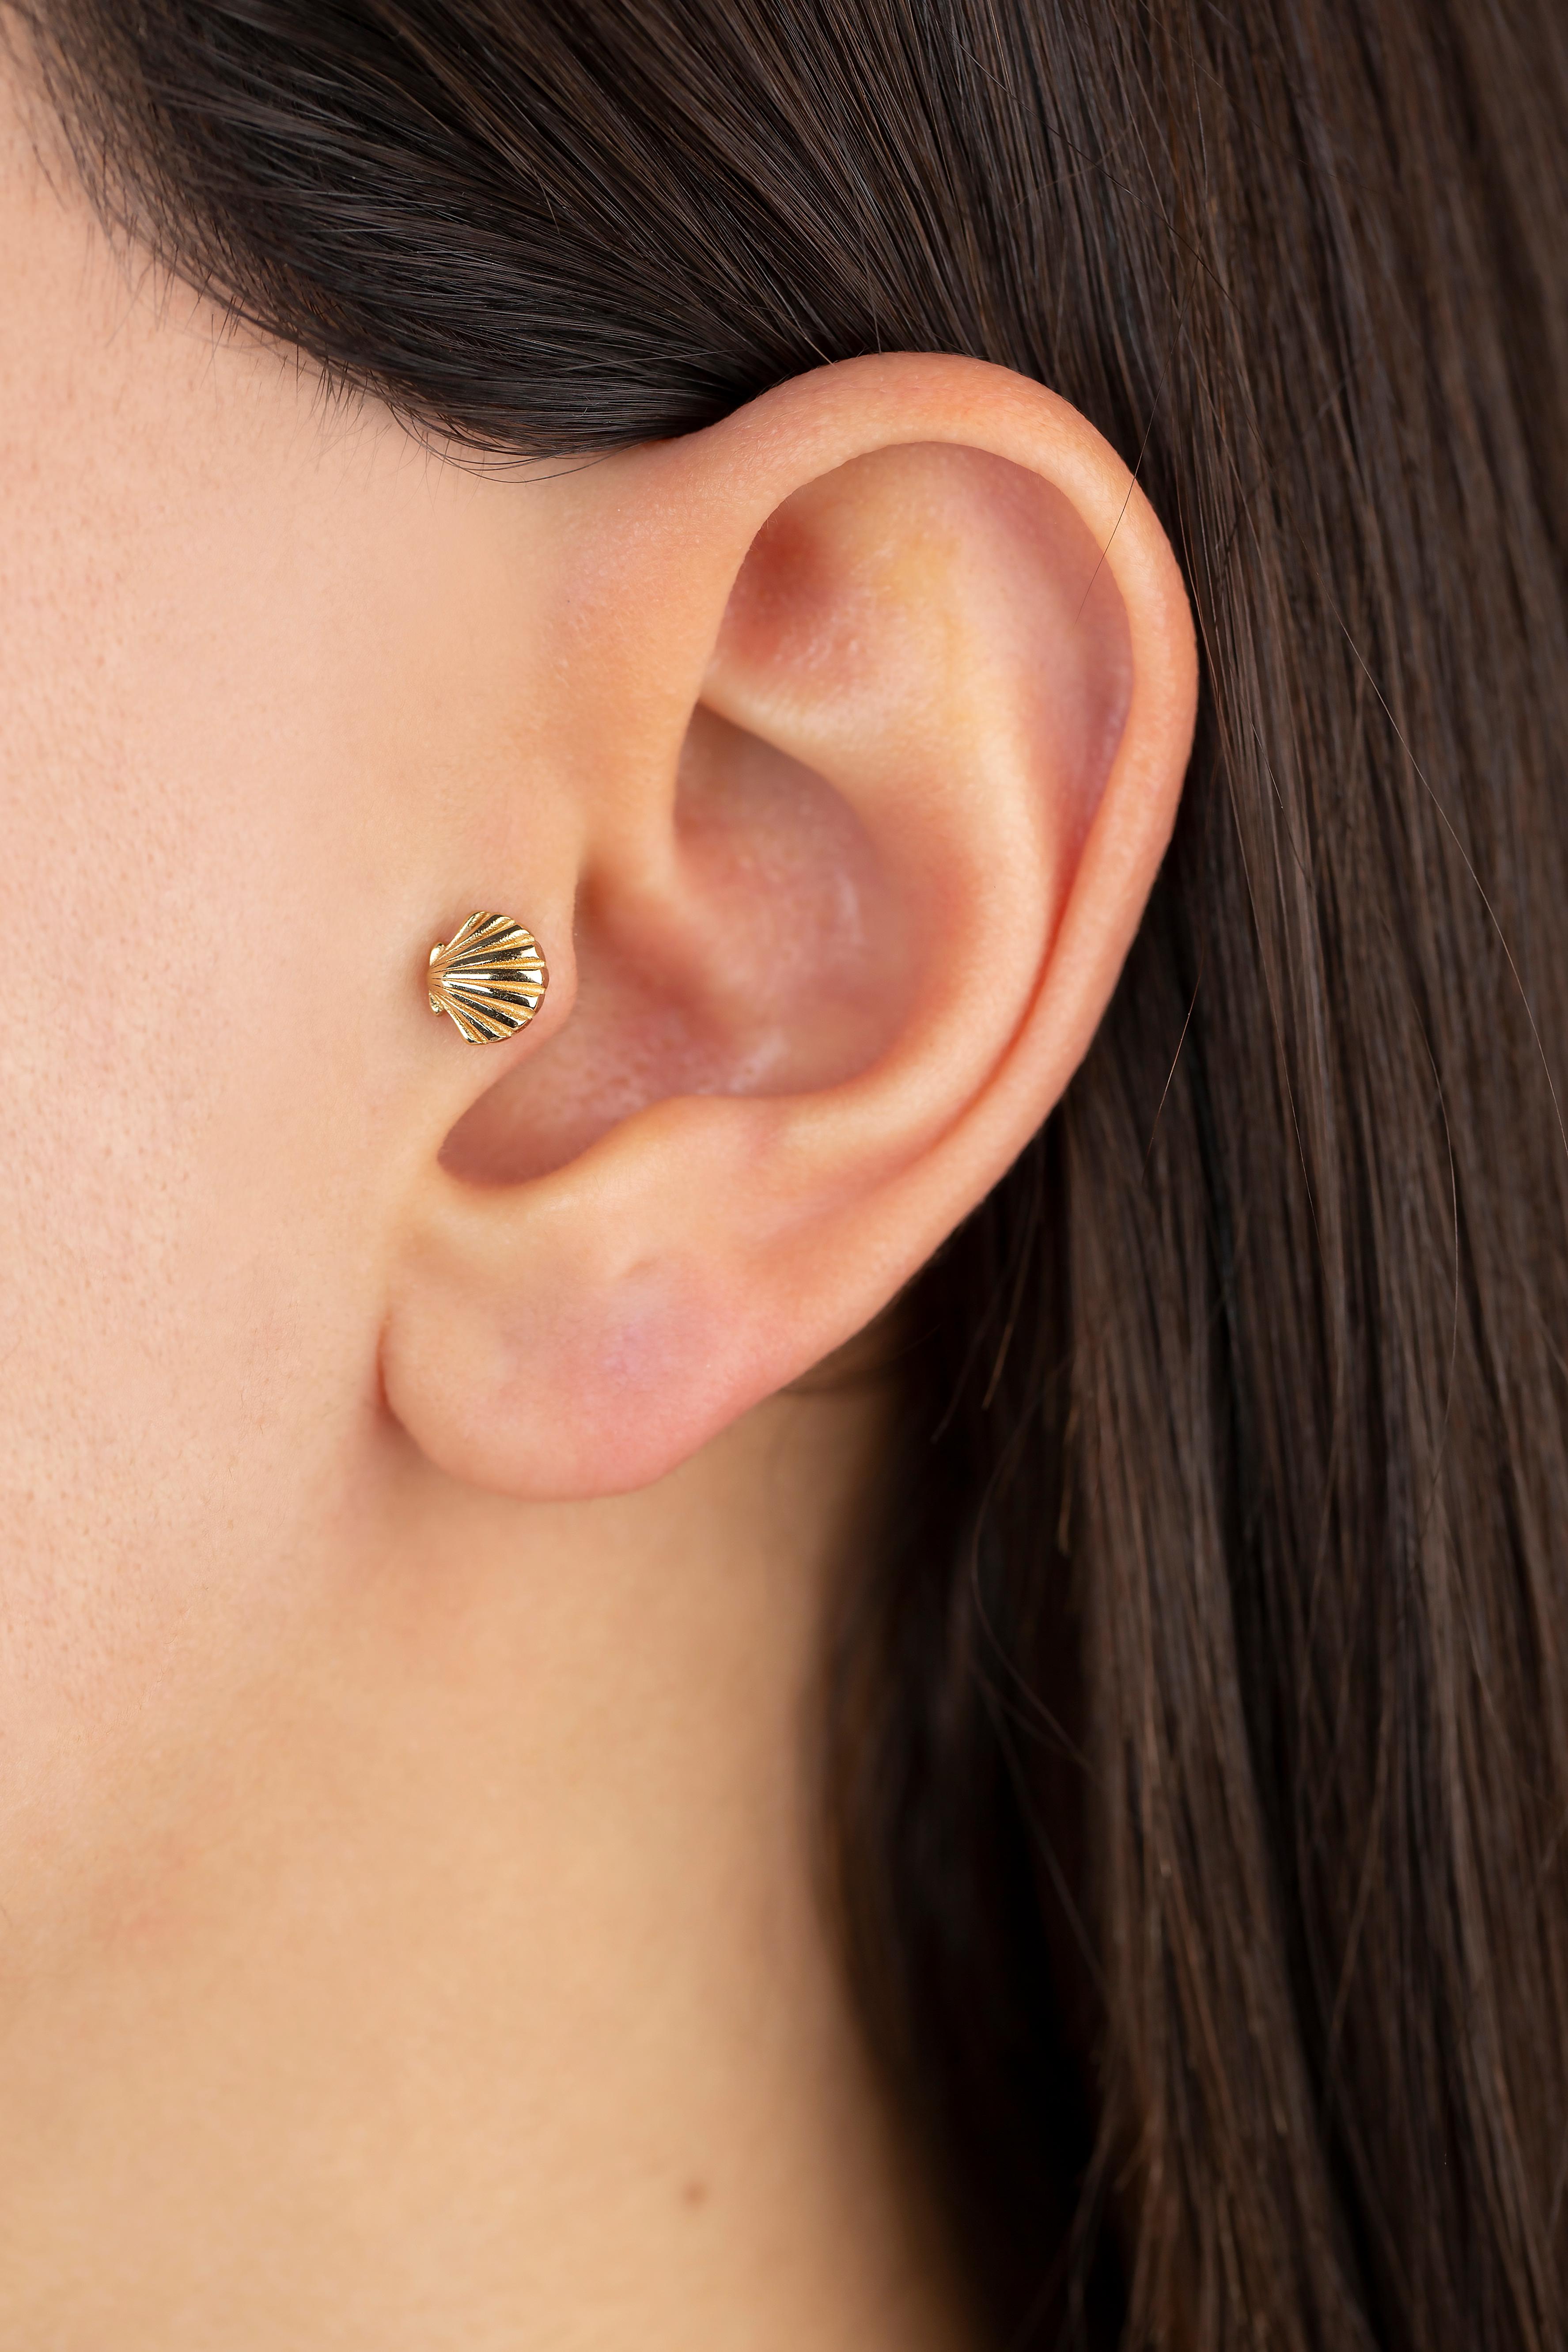 14K Gold Oyster Piercing, Shell Gold Stud Earring

You can use the piercing as an earring too! Also this piercing is suitable for tragus, nose, helix, lobe, flat, medusa, monreo, labret and stud.

This piercing was made with quality materials and